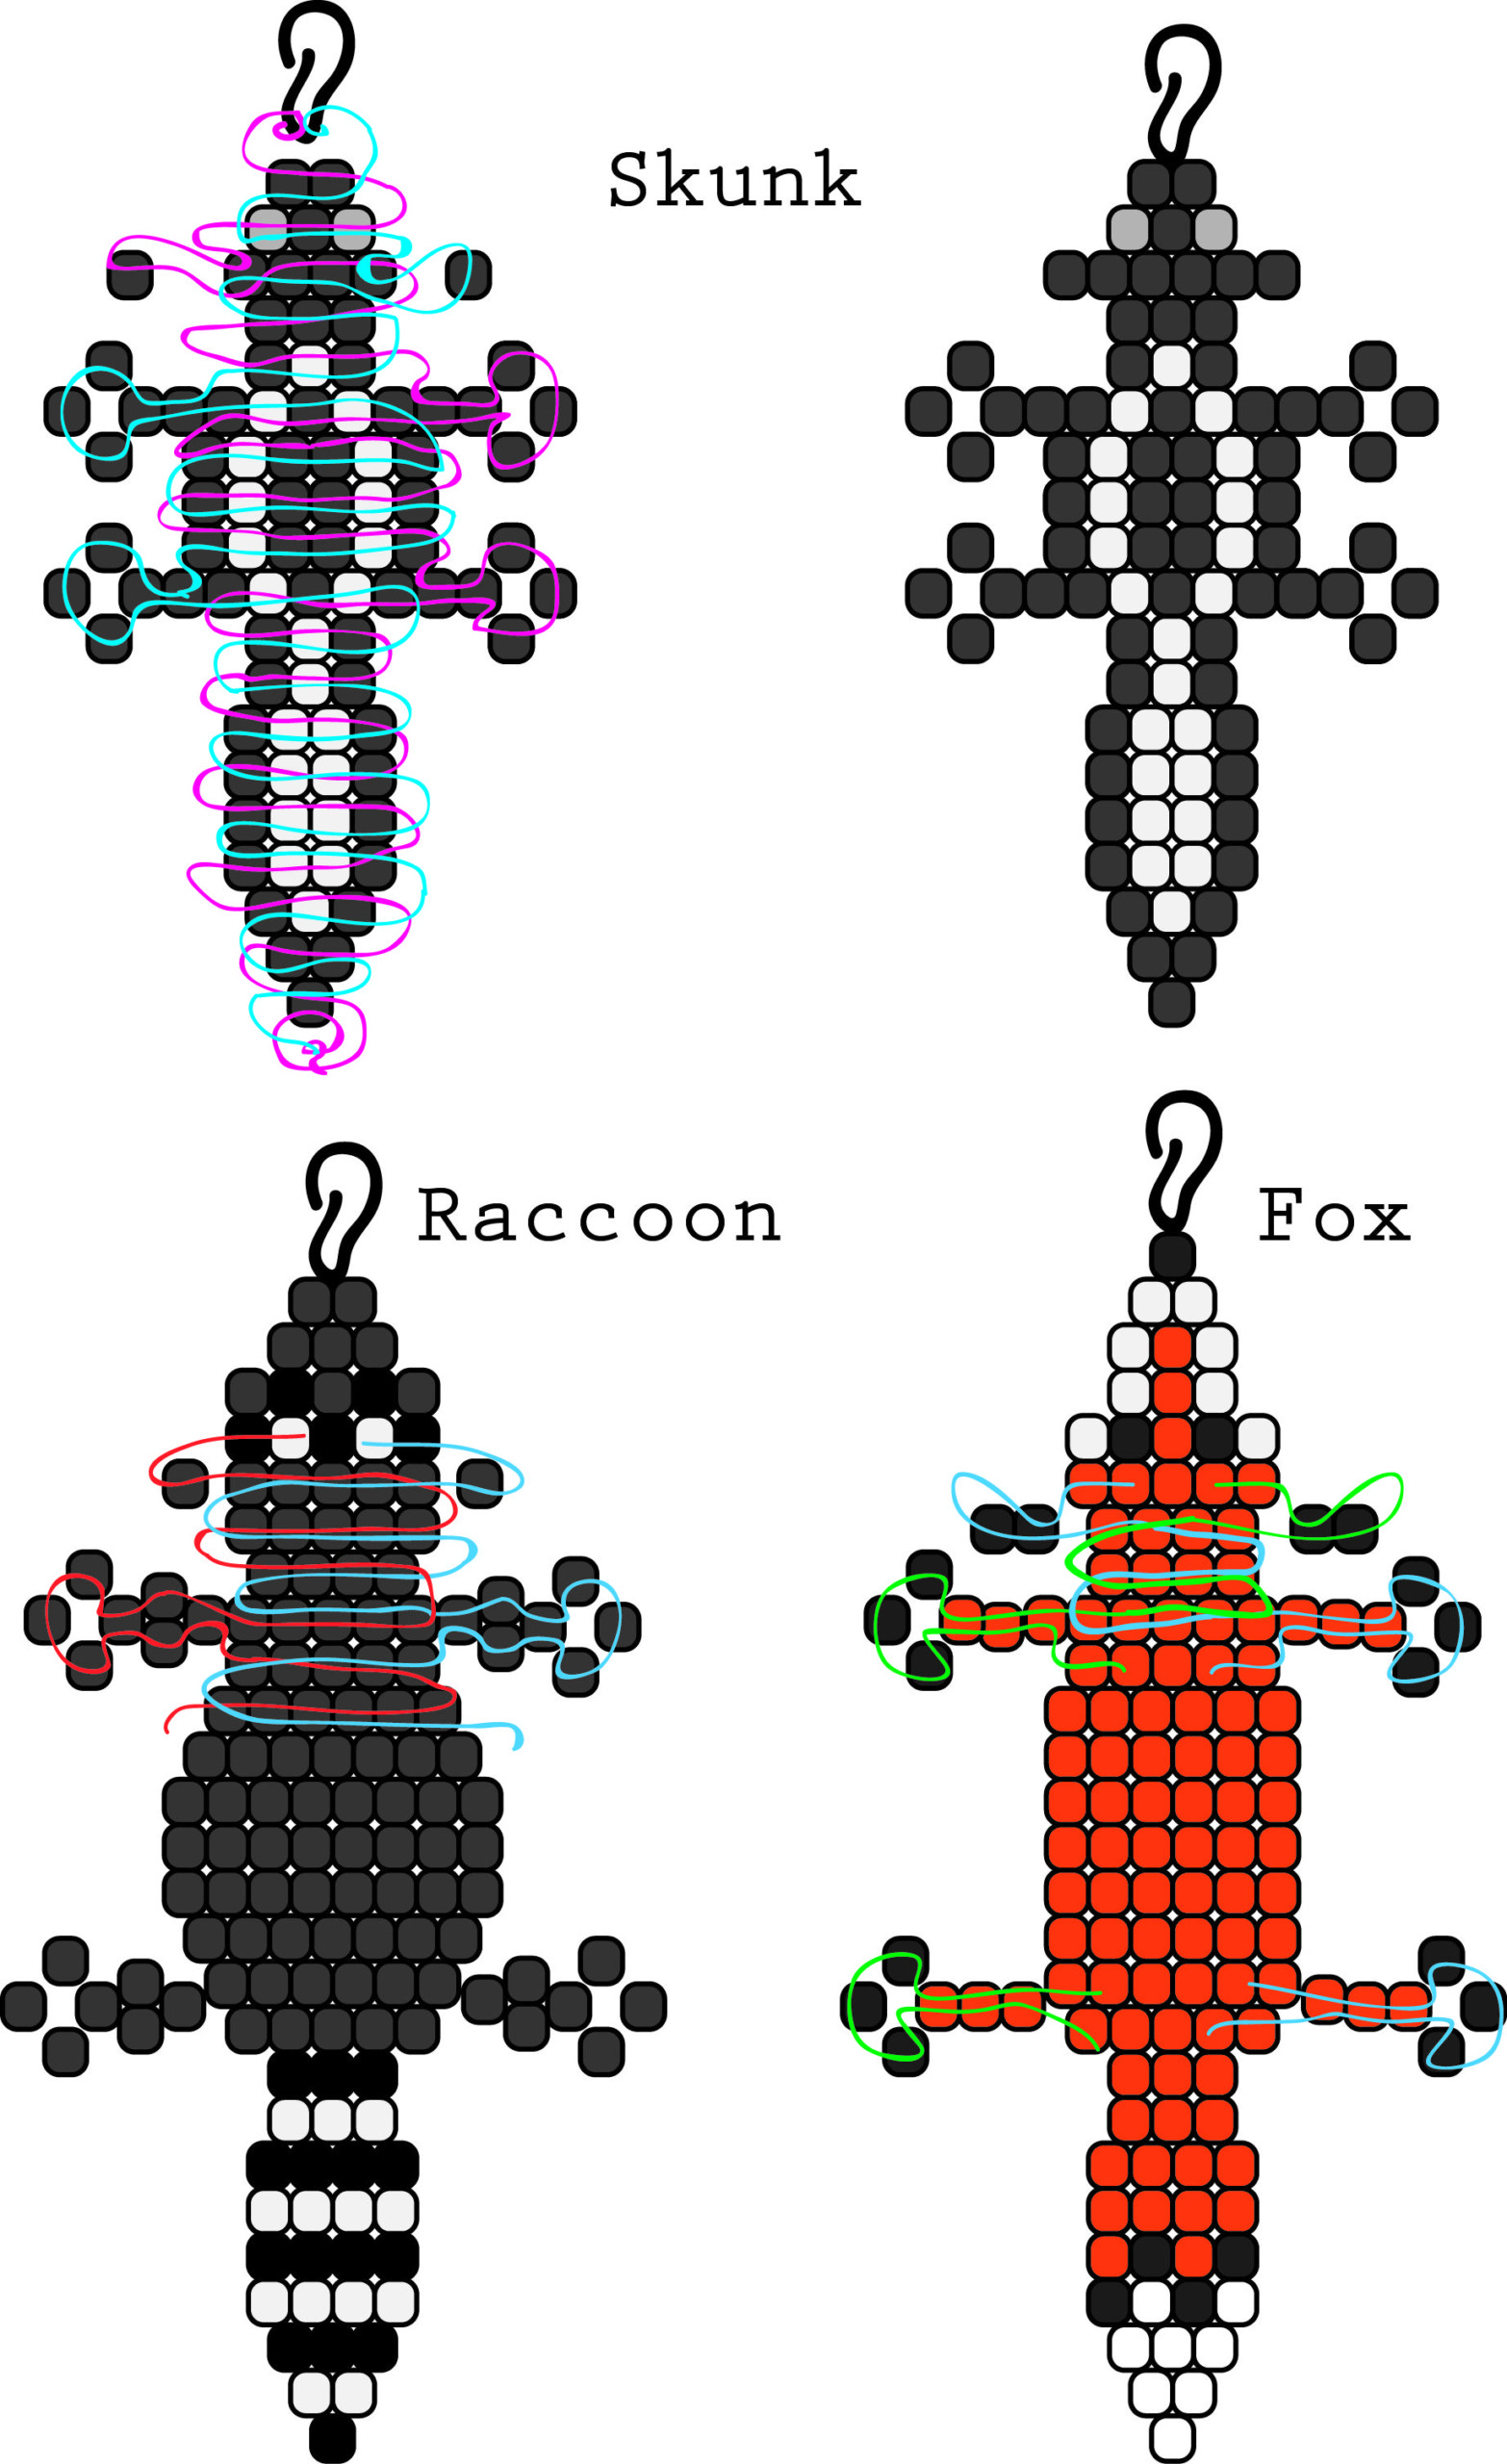 Image Only Skunk Raccoon And Fox Bead Buddies Based Off 